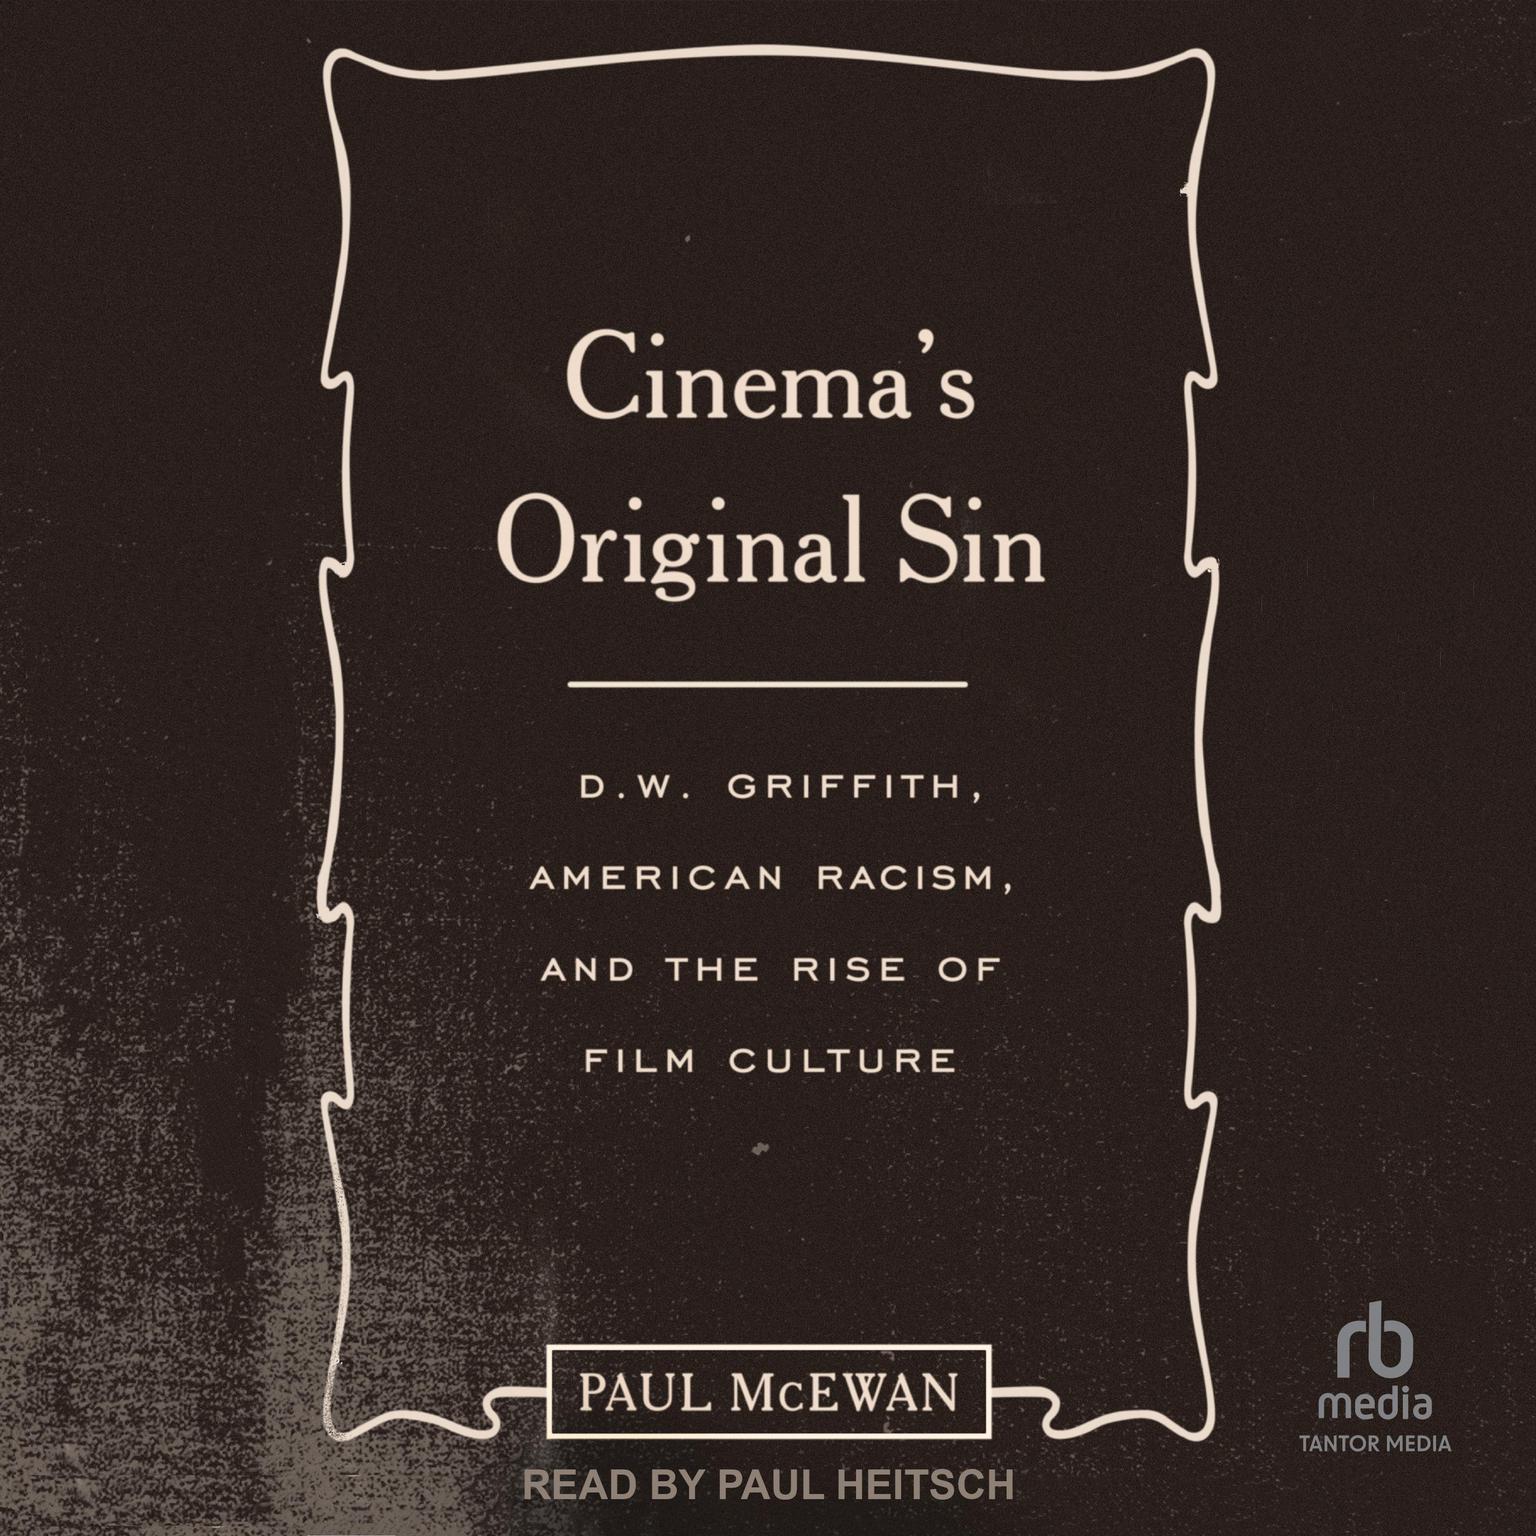 Cinemas Original Sin: D.W. Griffith, American Racism, and the Rise of Film Culture Audiobook, by Paul McEwan